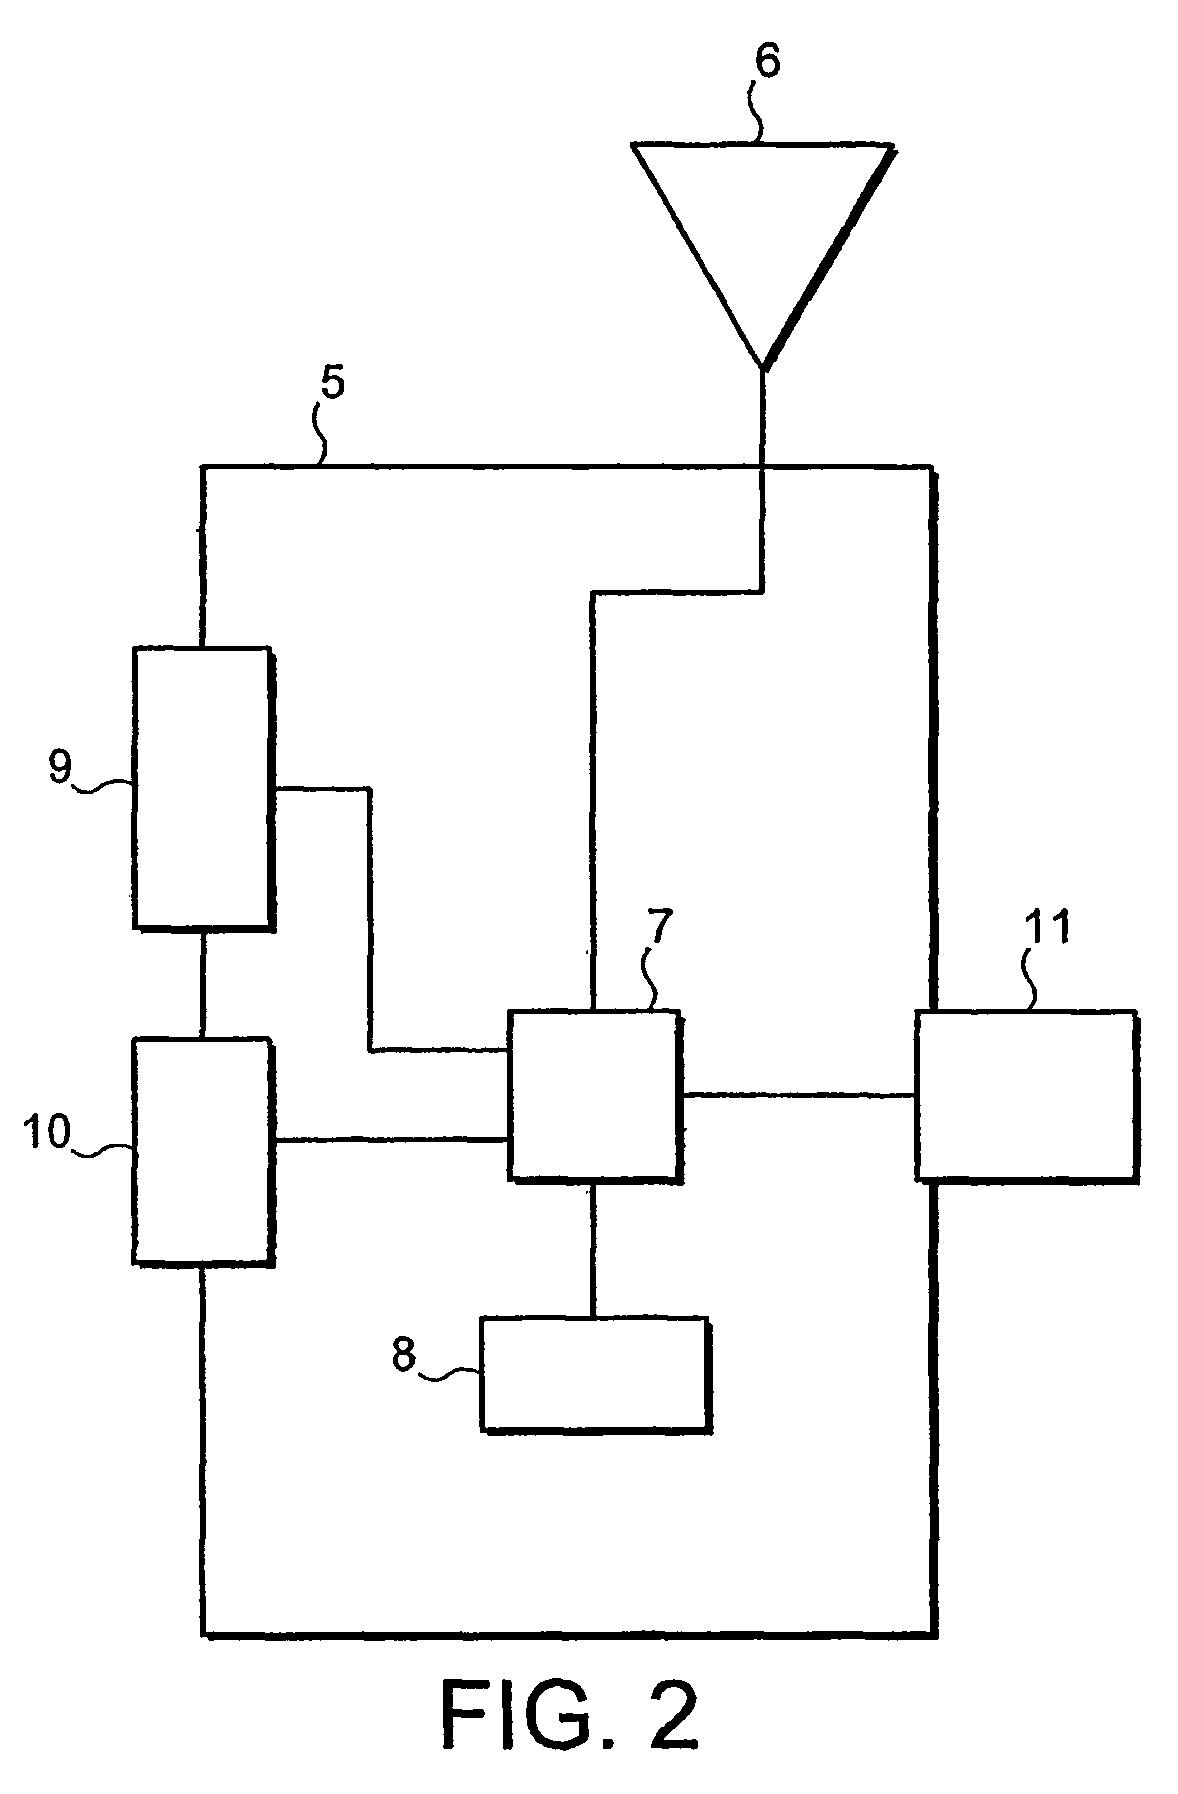 Method of operating a ticketing system